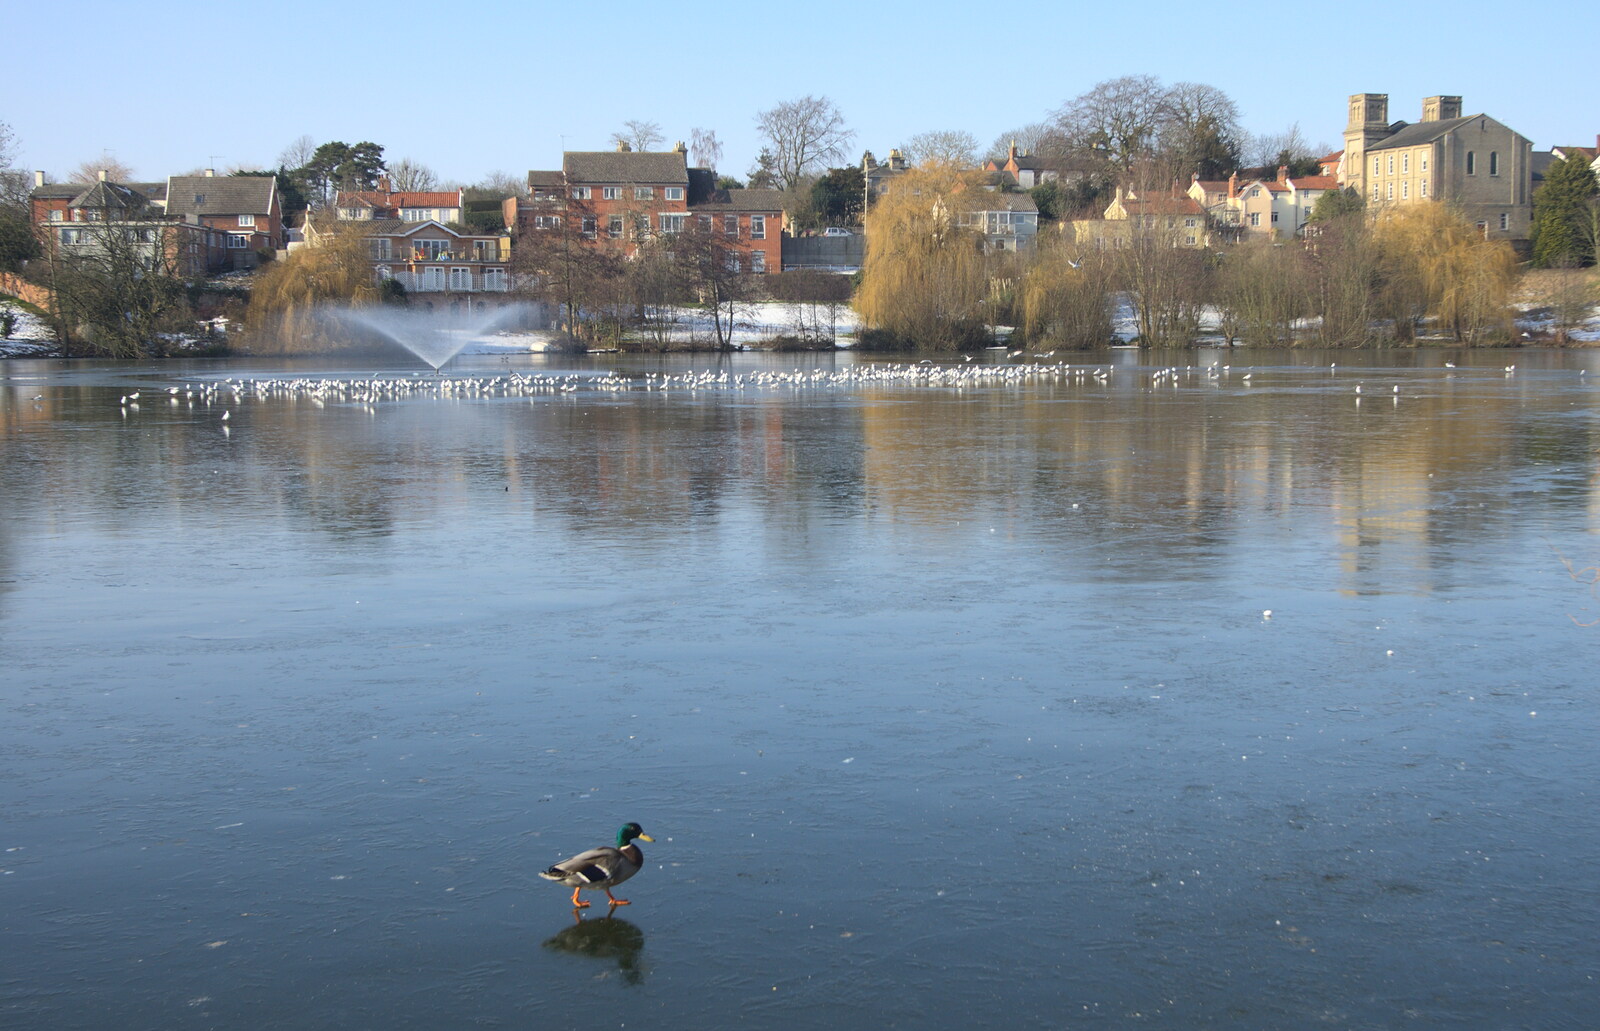 A duck waddles on the frozen Mere from A Snowy February Miscellany, Suffolk - 7th February 2012